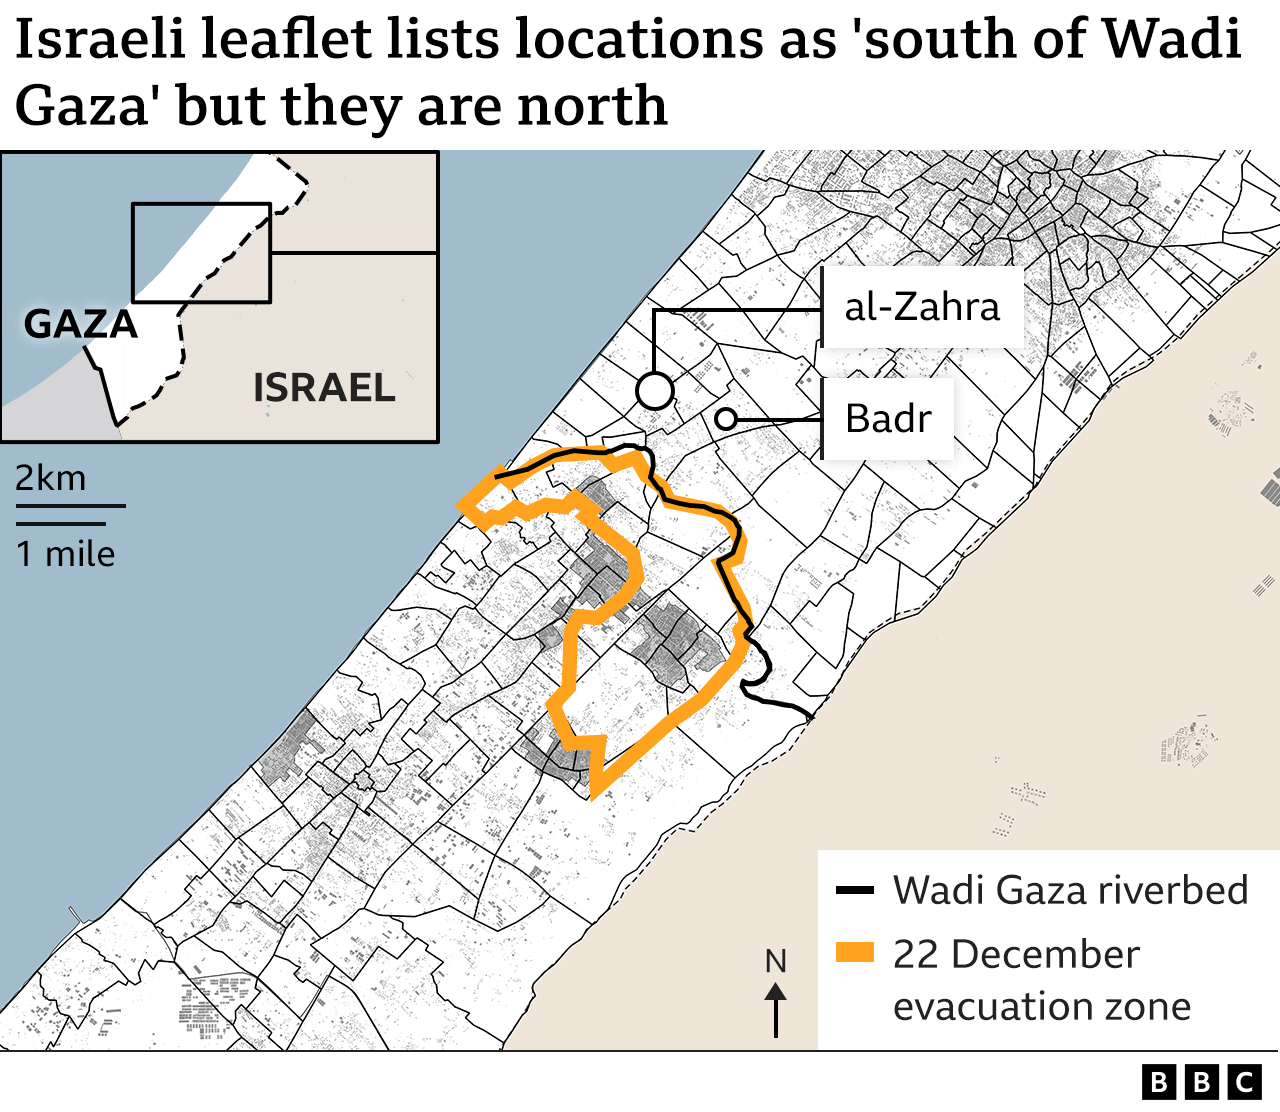 Map showing the evacuation area south of the Wadi Gaza riverbed and the al-Zahra and Badr neighbourhoods outside it in the north